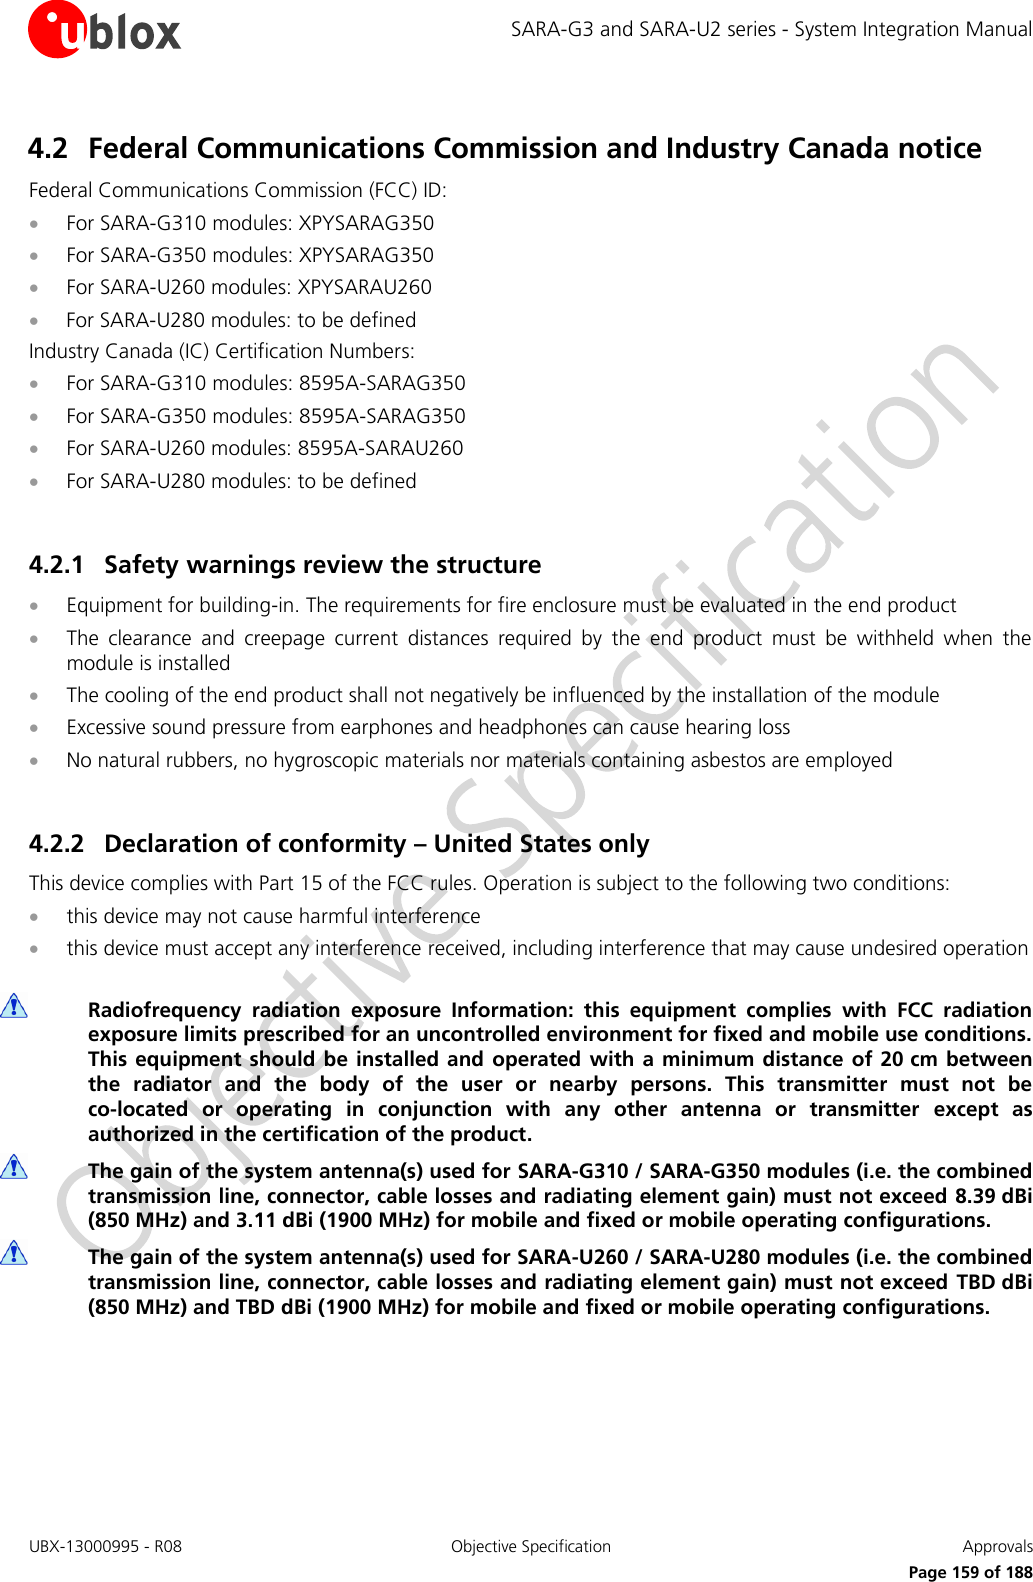 SARA-G3 and SARA-U2 series - System Integration Manual UBX-13000995 - R08  Objective Specification  Approvals     Page 159 of 188 4.2 Federal Communications Commission and Industry Canada notice Federal Communications Commission (FCC) ID:  For SARA-G310 modules: XPYSARAG350  For SARA-G350 modules: XPYSARAG350  For SARA-U260 modules: XPYSARAU260  For SARA-U280 modules: to be defined Industry Canada (IC) Certification Numbers:  For SARA-G310 modules: 8595A-SARAG350  For SARA-G350 modules: 8595A-SARAG350  For SARA-U260 modules: 8595A-SARAU260  For SARA-U280 modules: to be defined  4.2.1 Safety warnings review the structure  Equipment for building-in. The requirements for fire enclosure must be evaluated in the end product  The  clearance  and  creepage  current  distances  required  by  the  end  product  must  be  withheld  when  the module is installed  The cooling of the end product shall not negatively be influenced by the installation of the module  Excessive sound pressure from earphones and headphones can cause hearing loss  No natural rubbers, no hygroscopic materials nor materials containing asbestos are employed  4.2.2 Declaration of conformity – United States only This device complies with Part 15 of the FCC rules. Operation is subject to the following two conditions:  this device may not cause harmful interference  this device must accept any interference received, including interference that may cause undesired operation   Radiofrequency  radiation  exposure  Information:  this  equipment  complies  with  FCC  radiation exposure limits prescribed for an uncontrolled environment for fixed and mobile use conditions. This equipment should  be installed  and operated  with a minimum distance of 20 cm between the  radiator  and  the  body  of  the  user  or  nearby  persons.  This  transmitter  must  not  be co-located  or  operating  in  conjunction  with  any  other  antenna  or  transmitter  except  as authorized in the certification of the product.  The gain of the system antenna(s) used for SARA-G310 / SARA-G350 modules (i.e. the combined transmission line, connector, cable losses and radiating element gain) must not exceed 8.39 dBi (850 MHz) and 3.11 dBi (1900 MHz) for mobile and fixed or mobile operating configurations.  The gain of the system antenna(s) used for SARA-U260 / SARA-U280 modules (i.e. the combined transmission line, connector, cable losses and radiating element gain) must not exceed  TBD dBi (850 MHz) and TBD dBi (1900 MHz) for mobile and fixed or mobile operating configurations.  